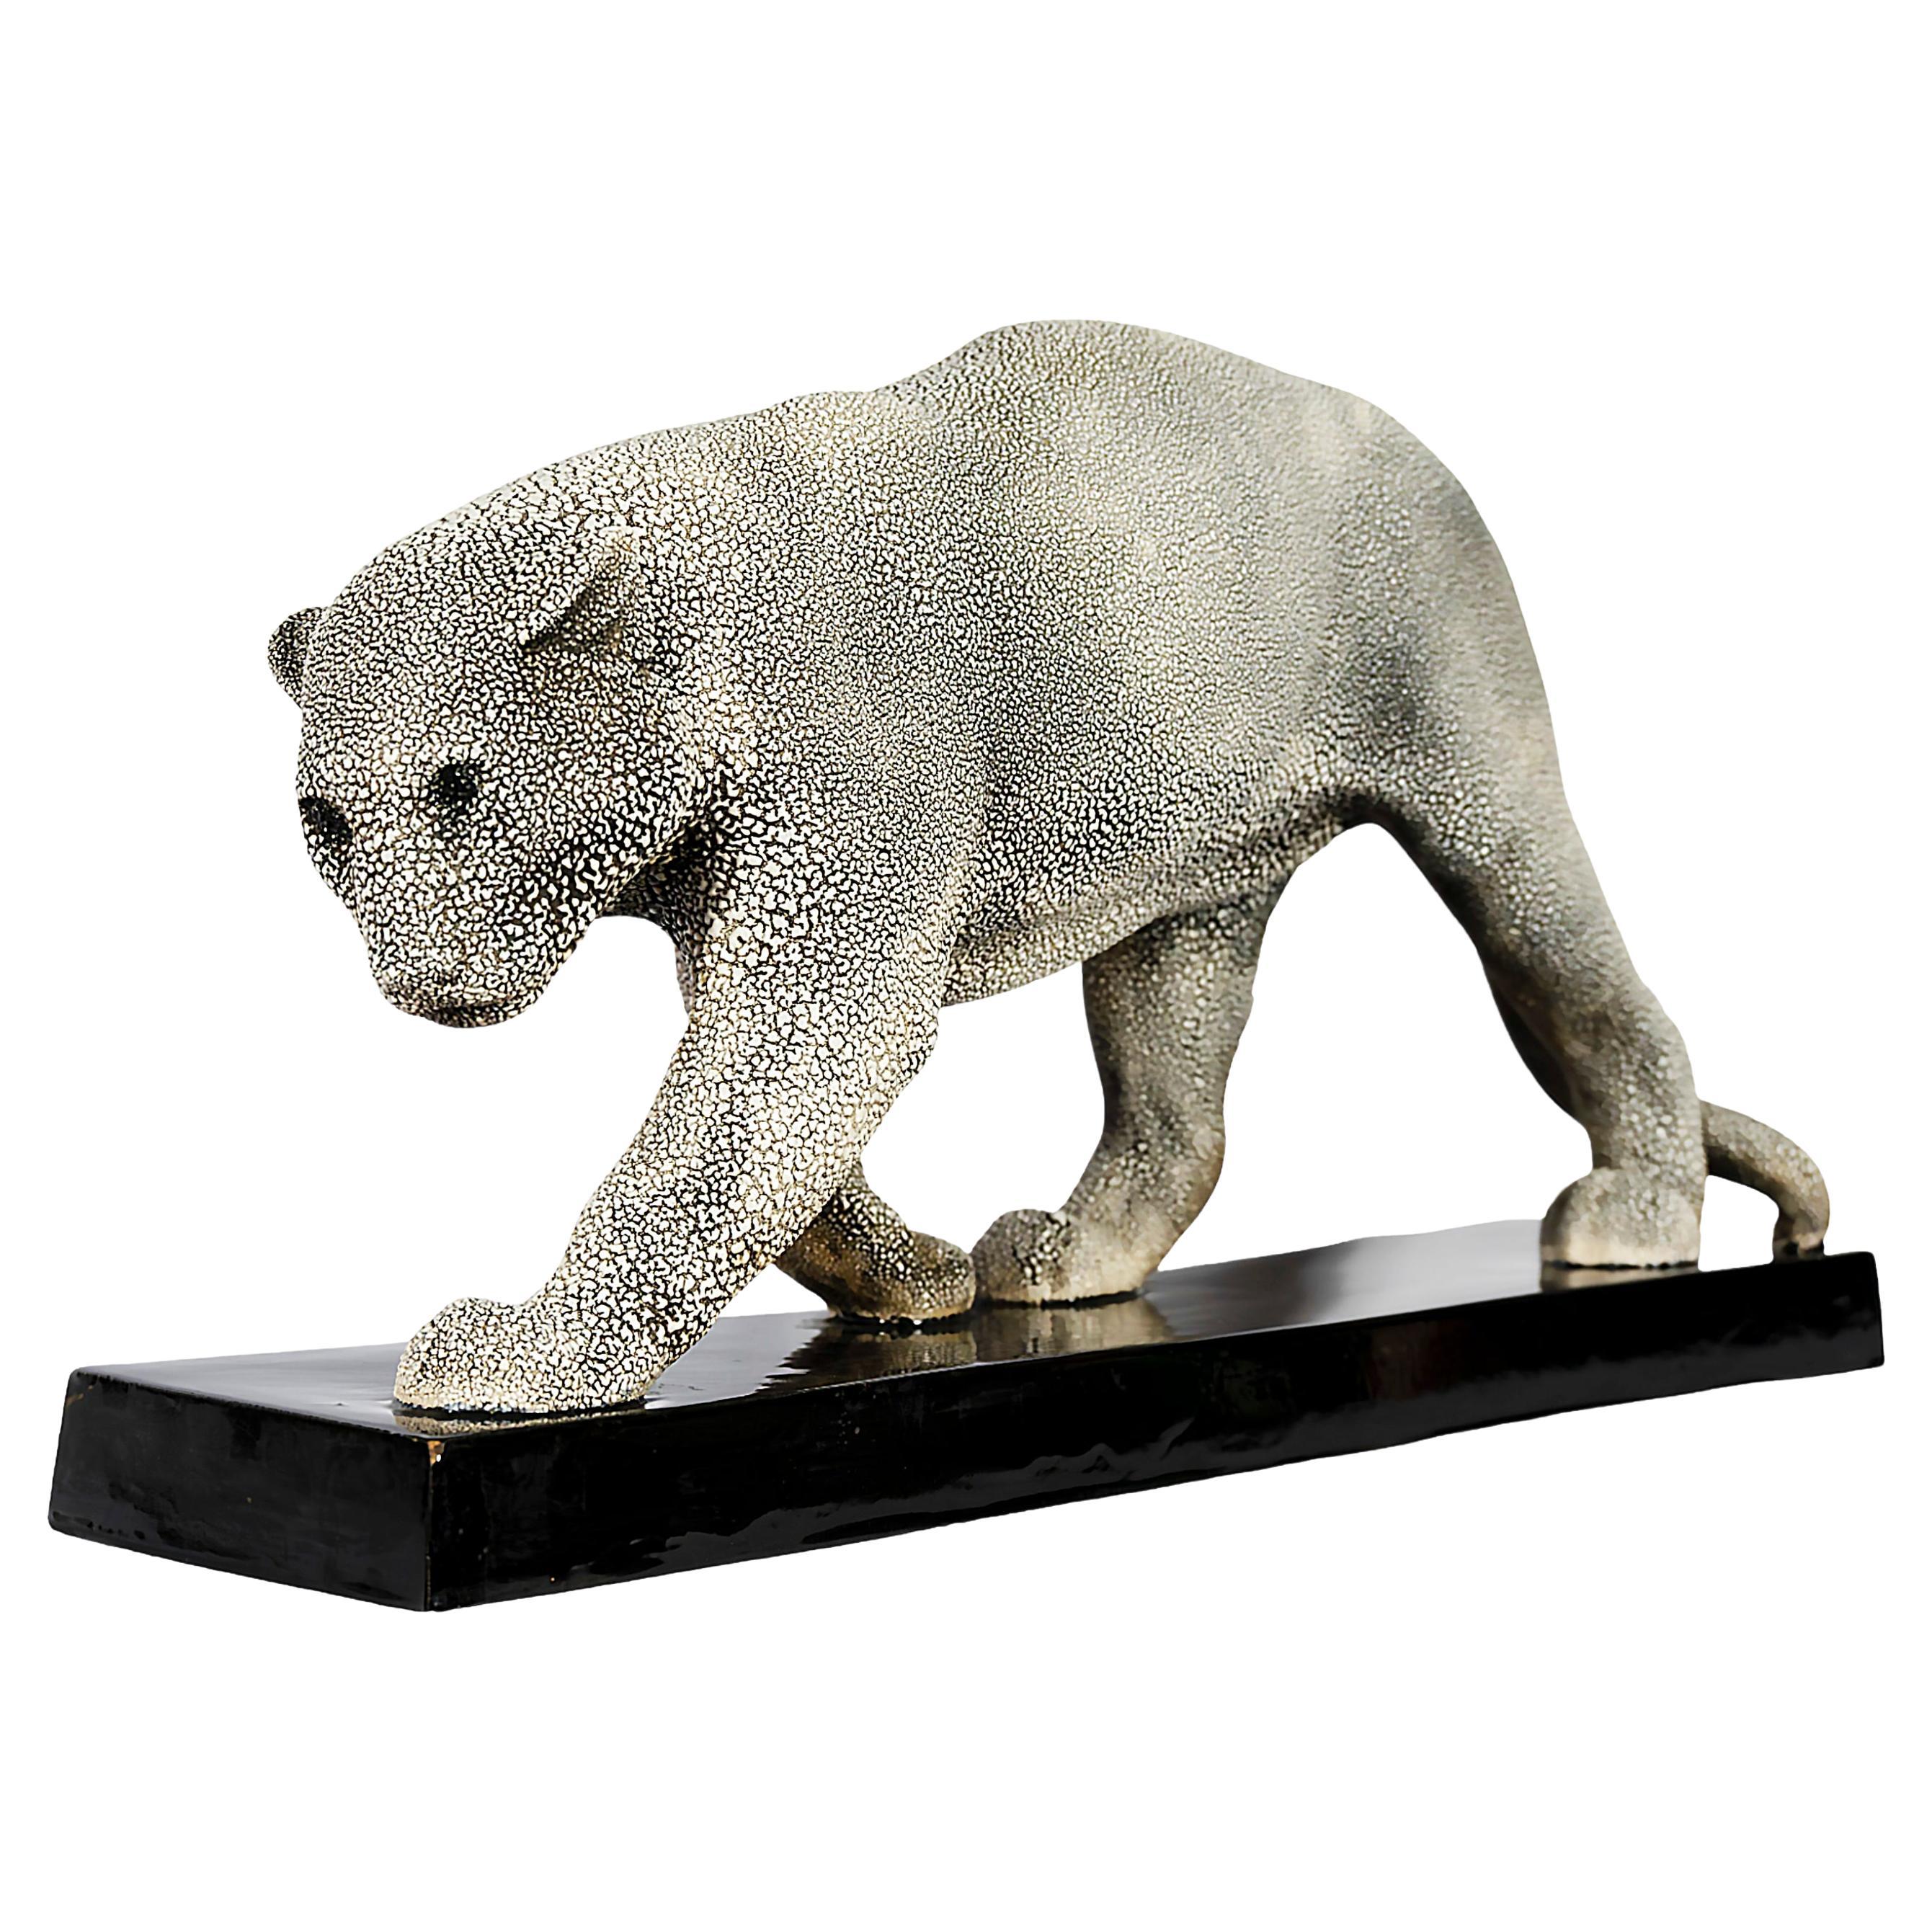 French Art Deco Ceramic Panther Sculpture by G.Beauvais for Edition Kaza, 1930's For Sale